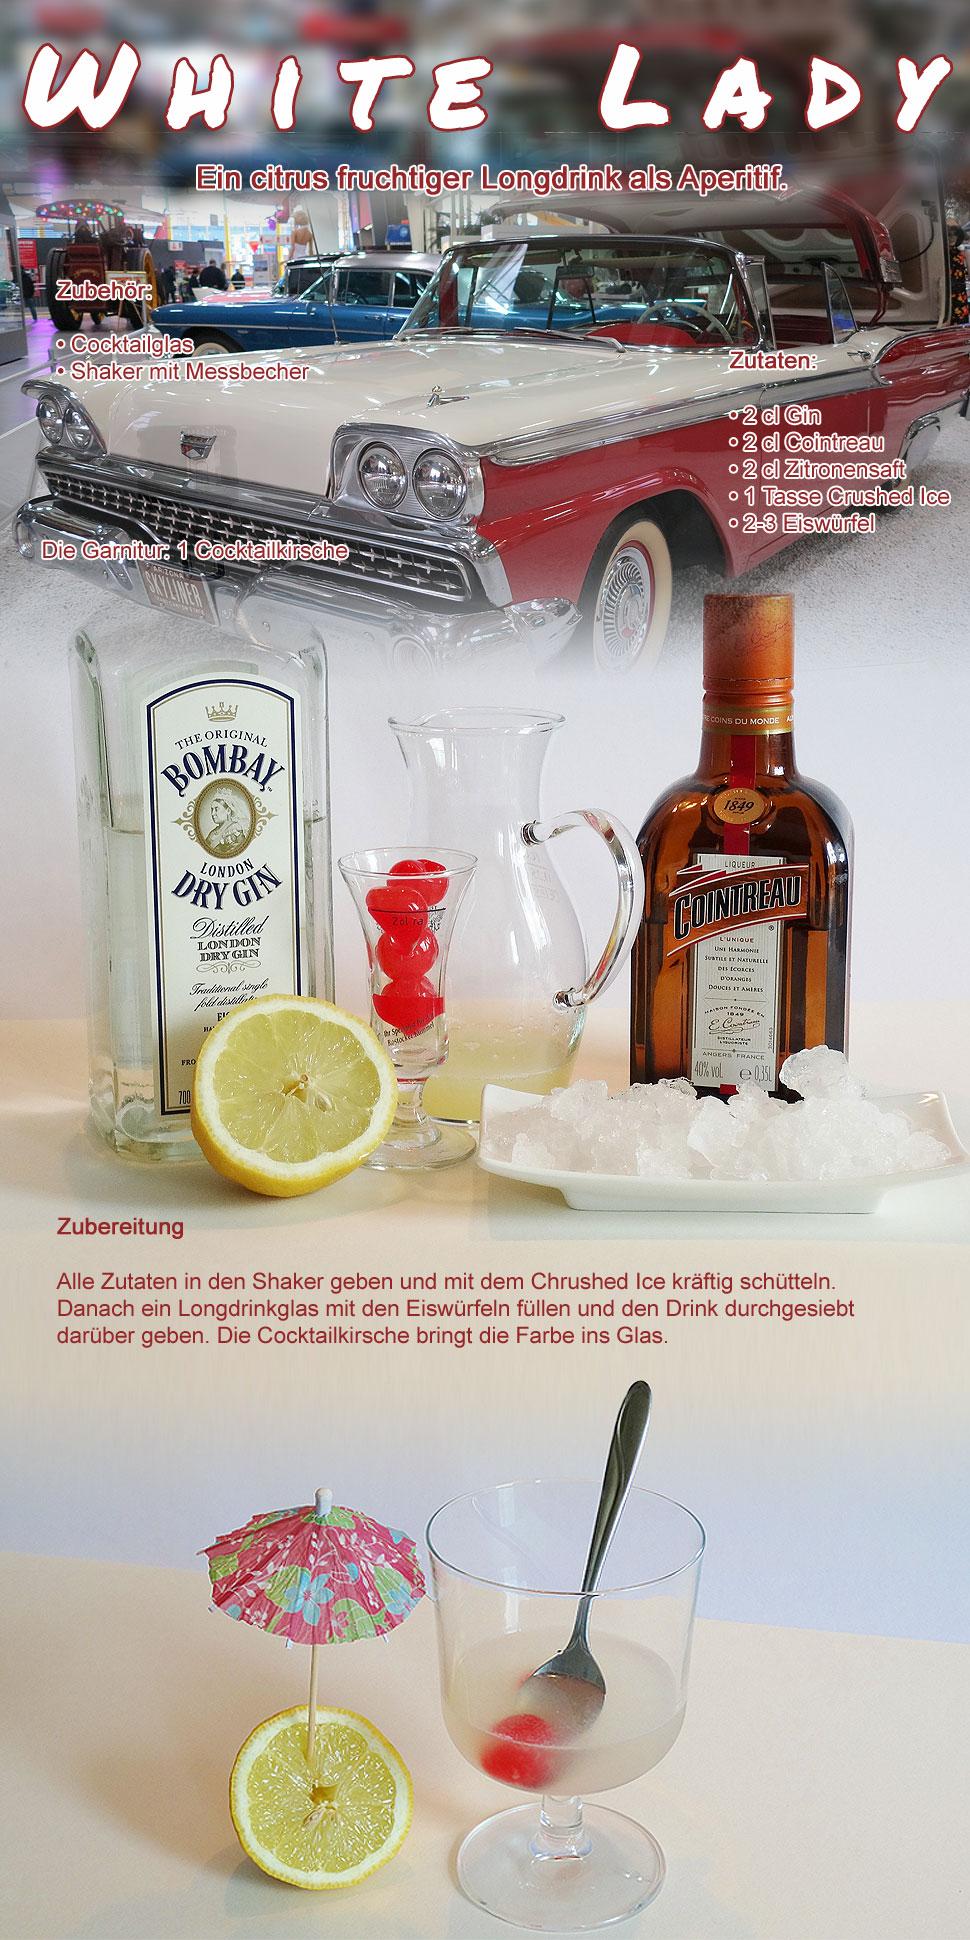 Leckere Cocktails - White Lady